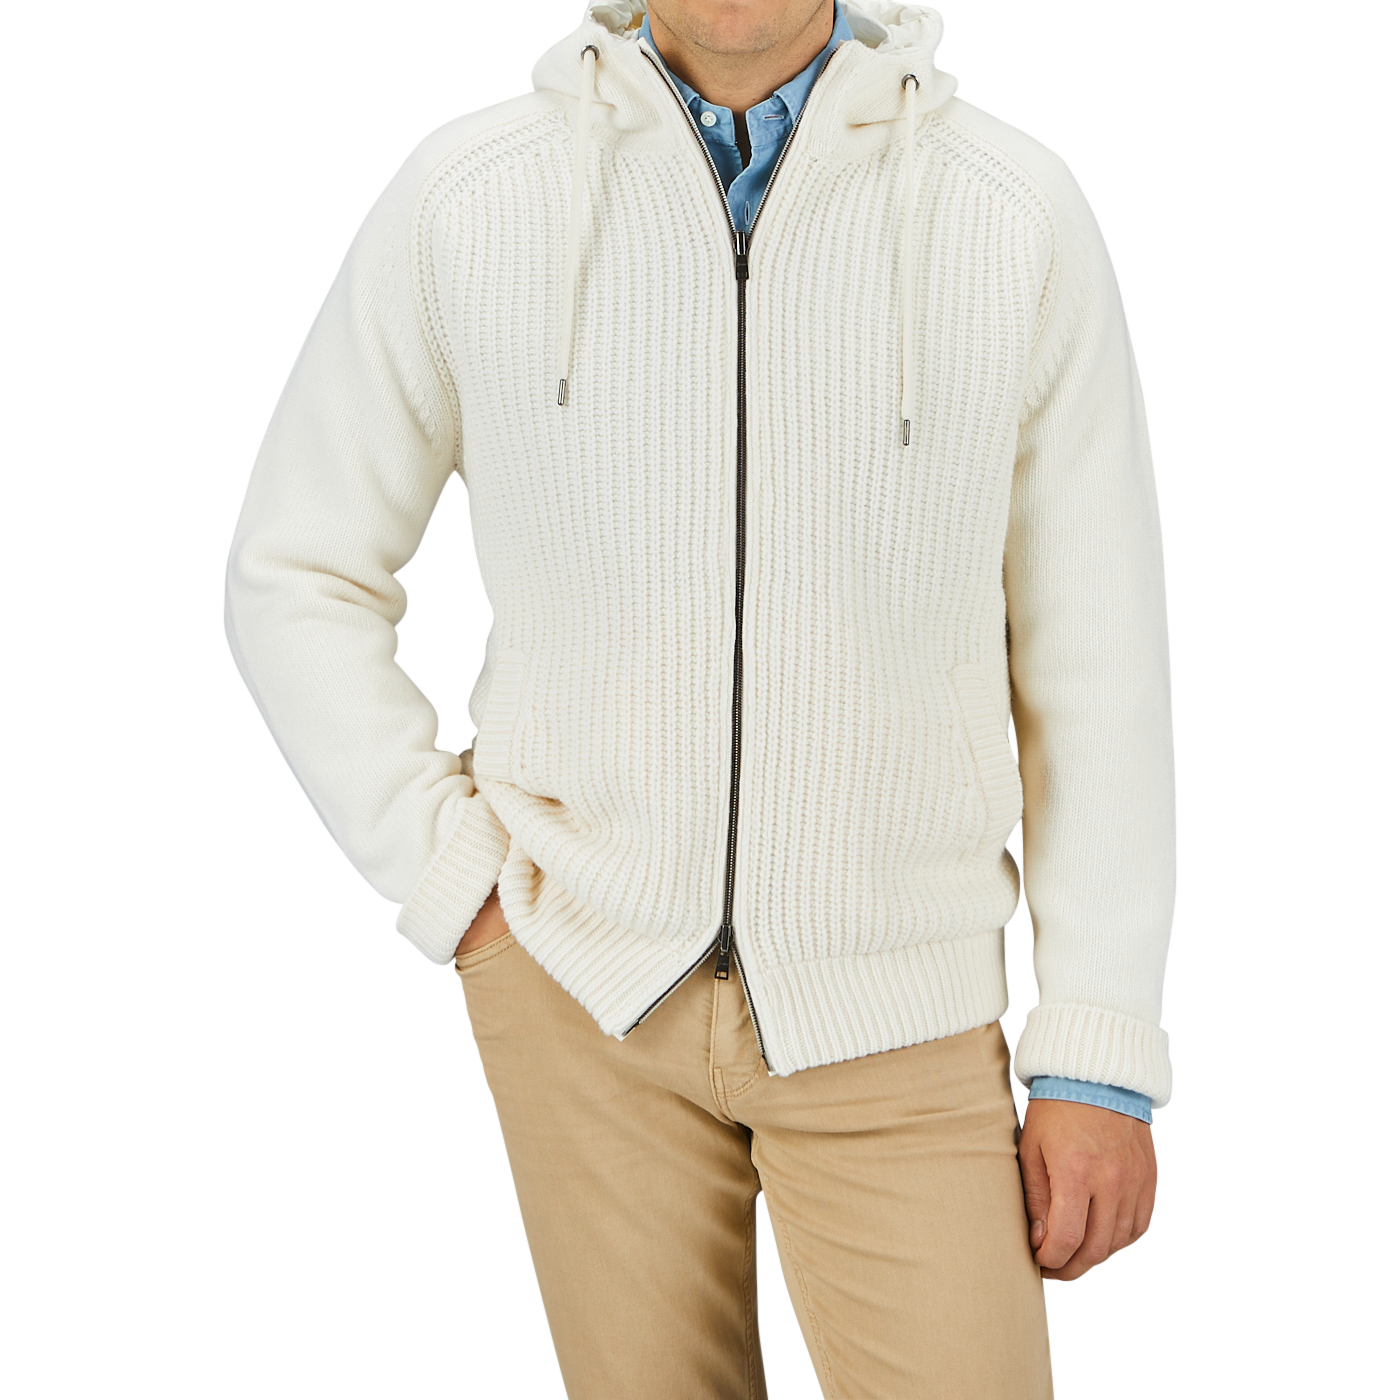 A person is wearing a Herno Cream Wool Nylon Reversible Knitted Jacket, crafted from virgin wool, with a front zipper over a blue shirt, paired with beige pants. The person's hands are in their pockets. Only the torso is visible.